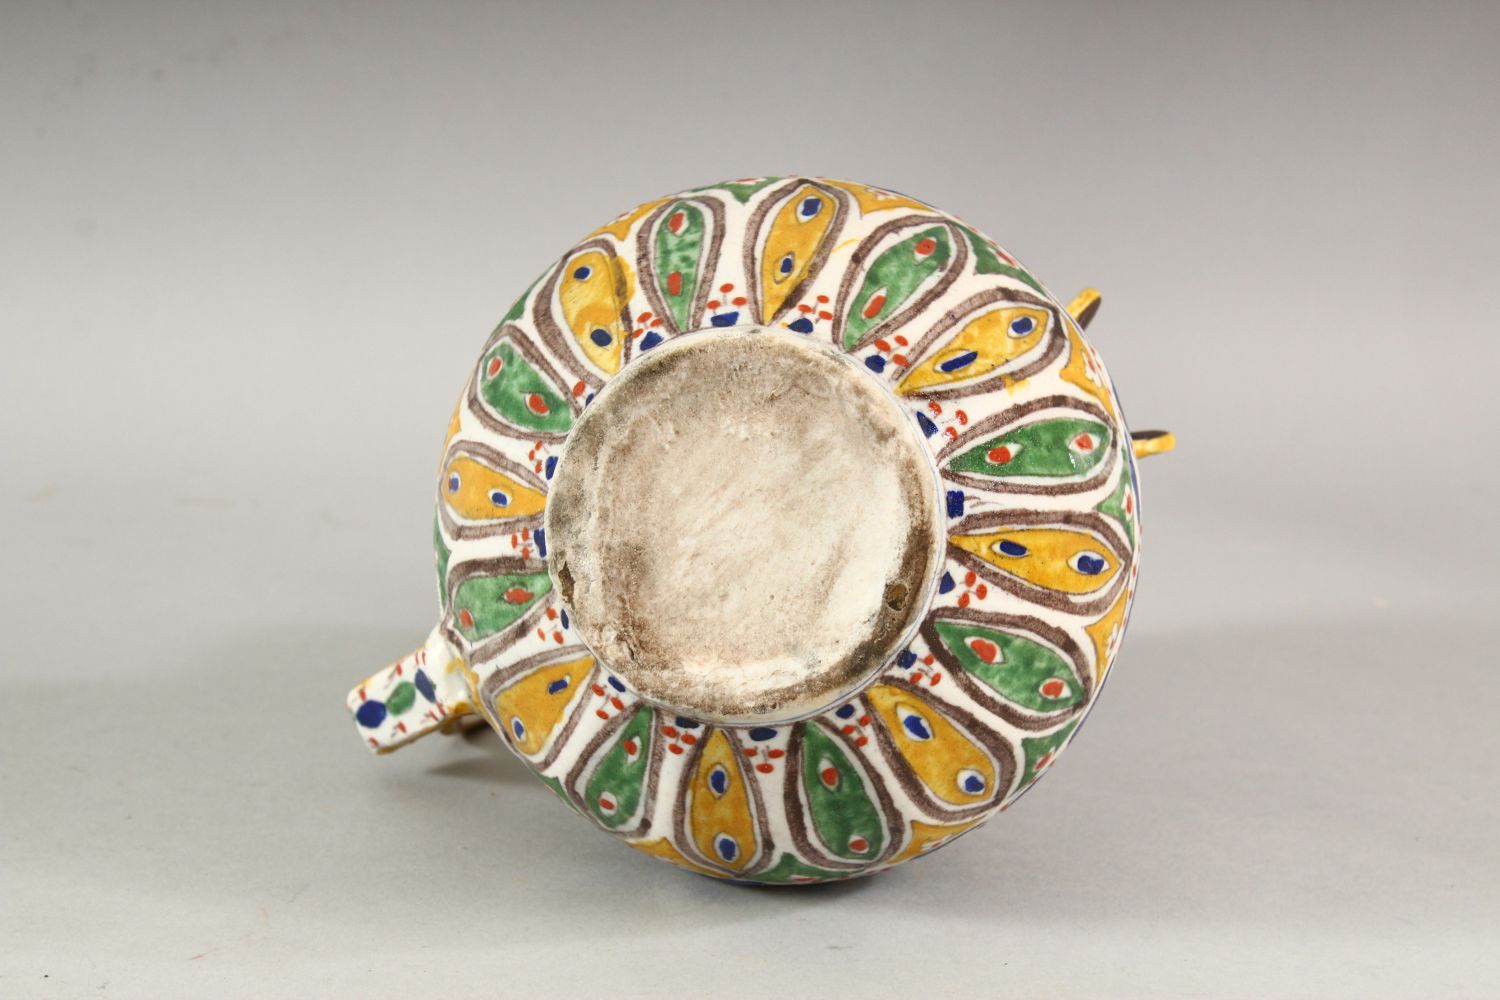 A TURKISH OTTOMAN KUTAHYA POTTERY POT - the body with multi coloured leaf shaped tendril with a - Image 6 of 6